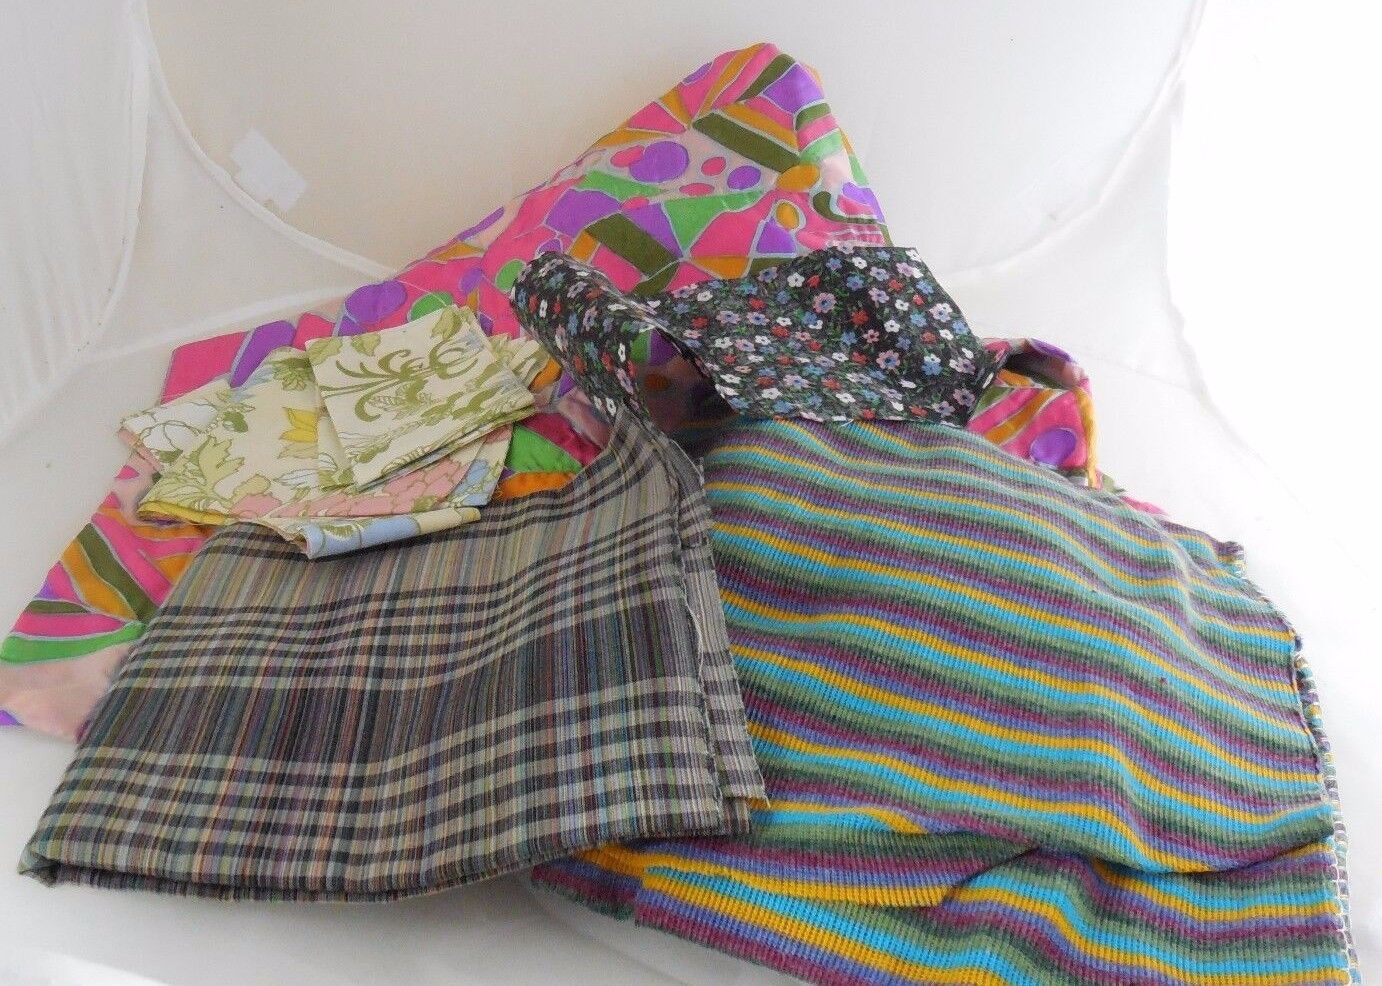 Large Lot of 25lbs of Fabric Scraps Including Vintage 70s/80s/90s & More Modern